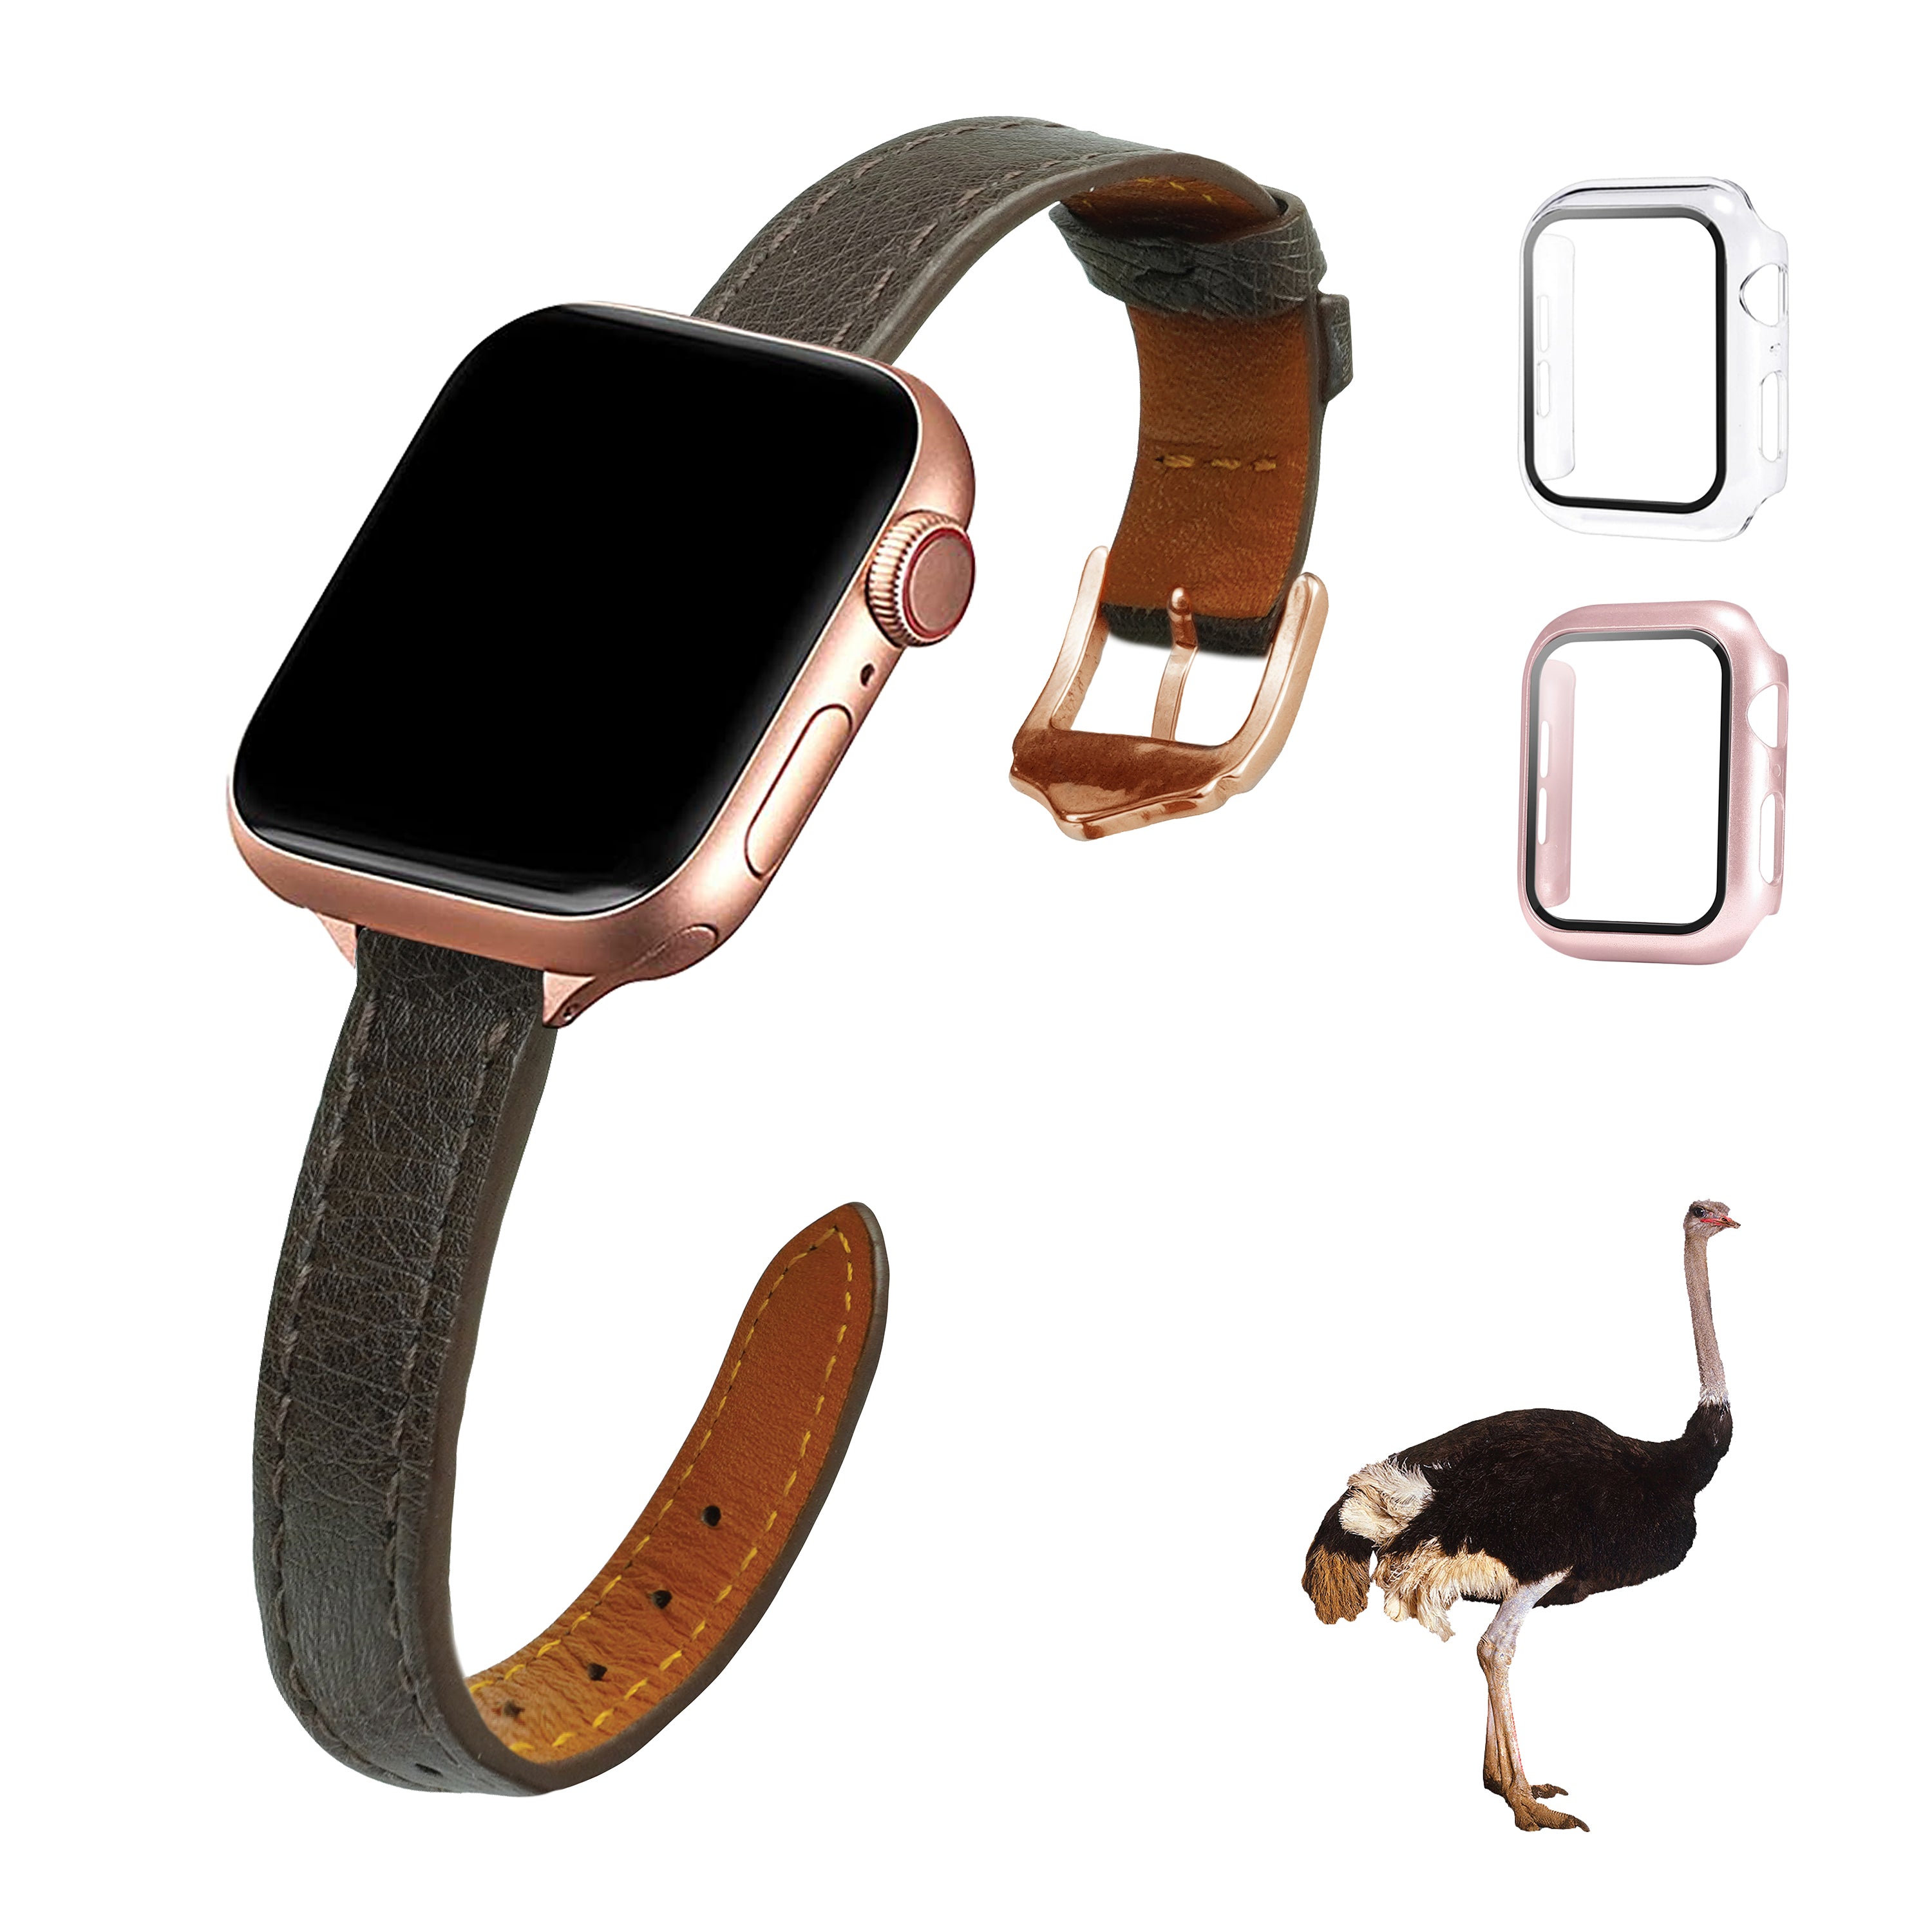 Dark Brown Flat Ostrich Leather Band Compatible Apple Watch Iwatch 44mm Screen Protector Case Gold Adapter Replacement Strap For Smartwatch Series 4 5 6 SE Leather Handmade AW-183G-W-44MM